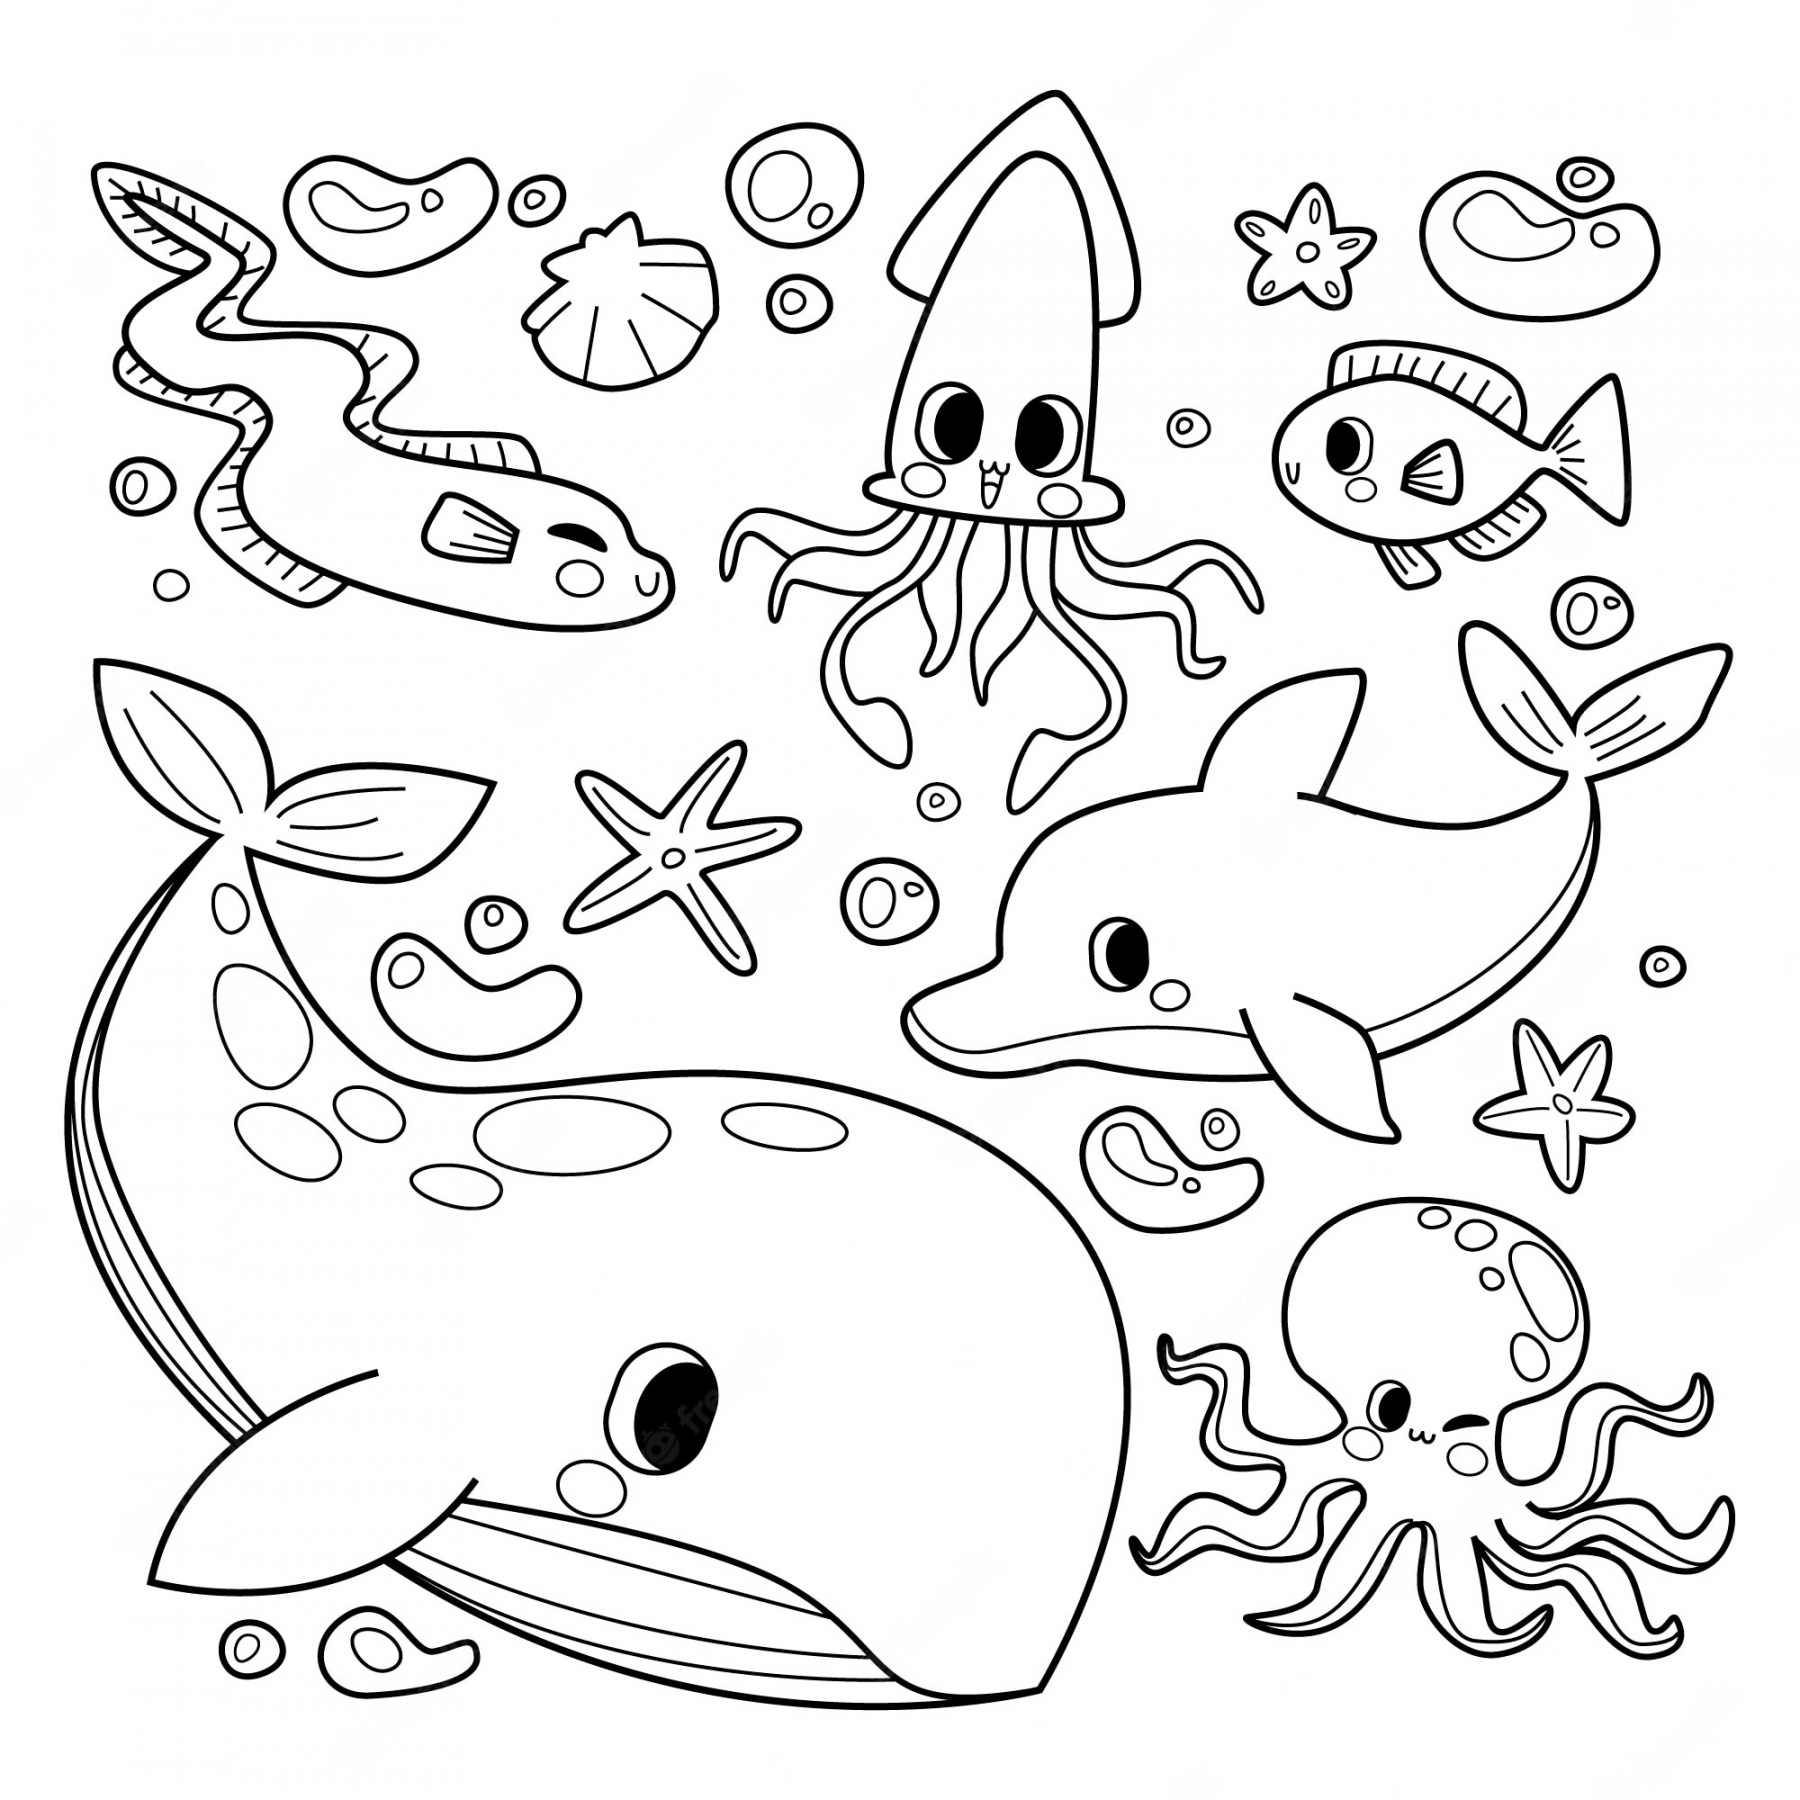 Free Printable Coloring Sheets - Printable - Coloring Pages Images - Free Download on Freepik